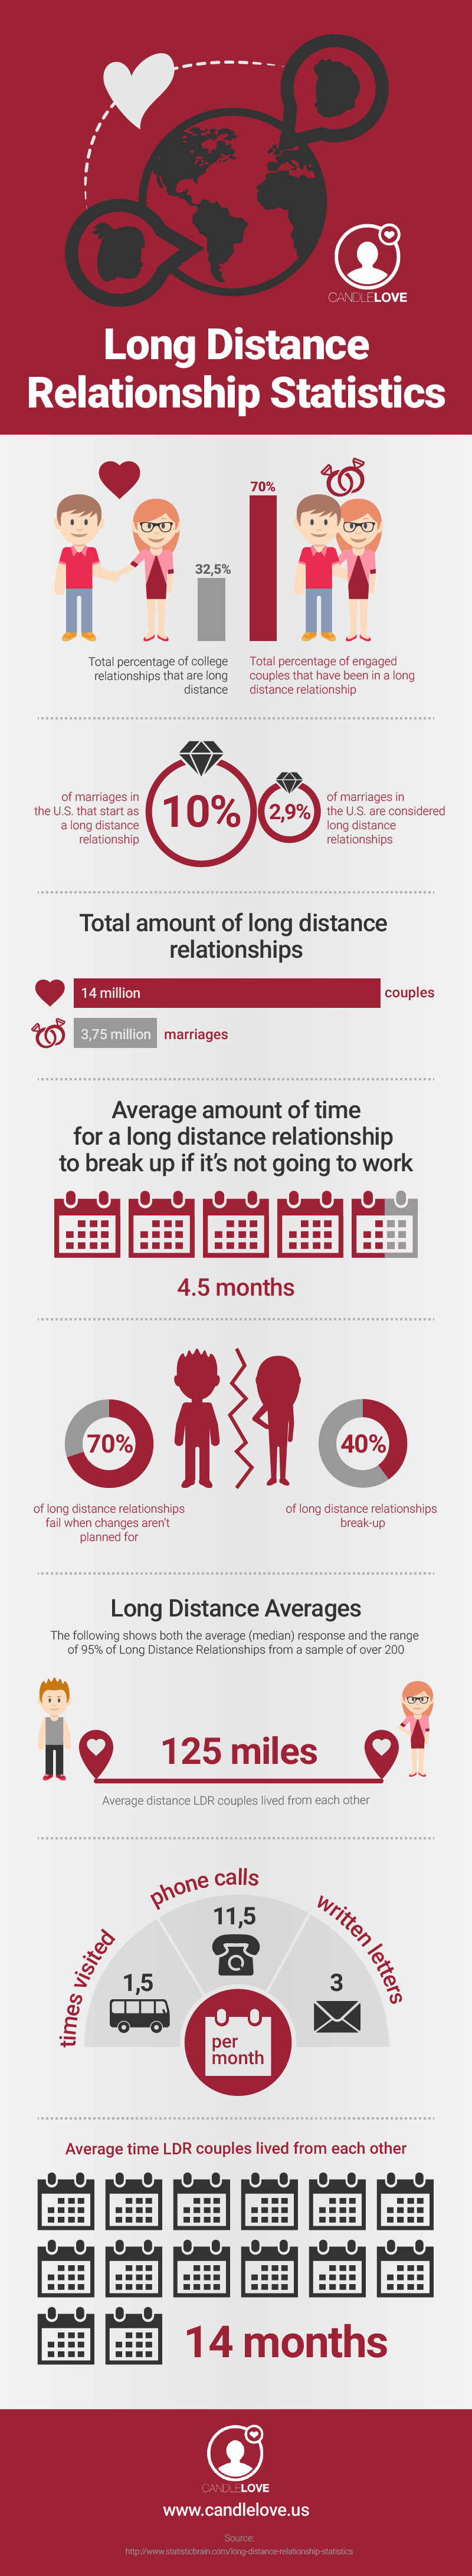 Long Distance Relationship Statistics in the US